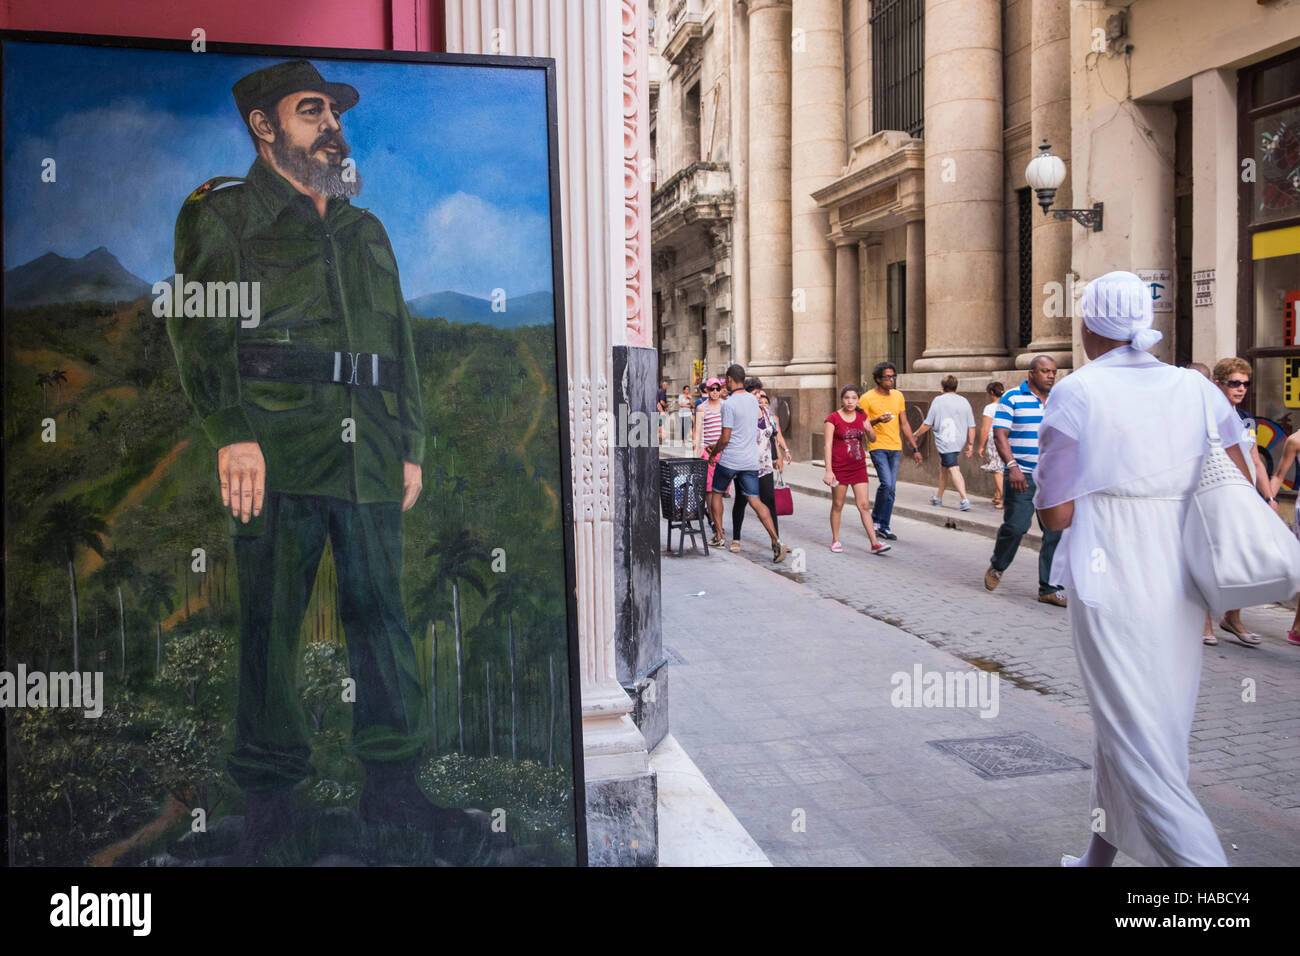 La Havana, Cuba, 26 November 2016. Scenes around the old town of La Havana on the day Castros death was announced. Painting of Fidel on show outside the Museum of the 28th September on Calle Obispo. Stock Photo